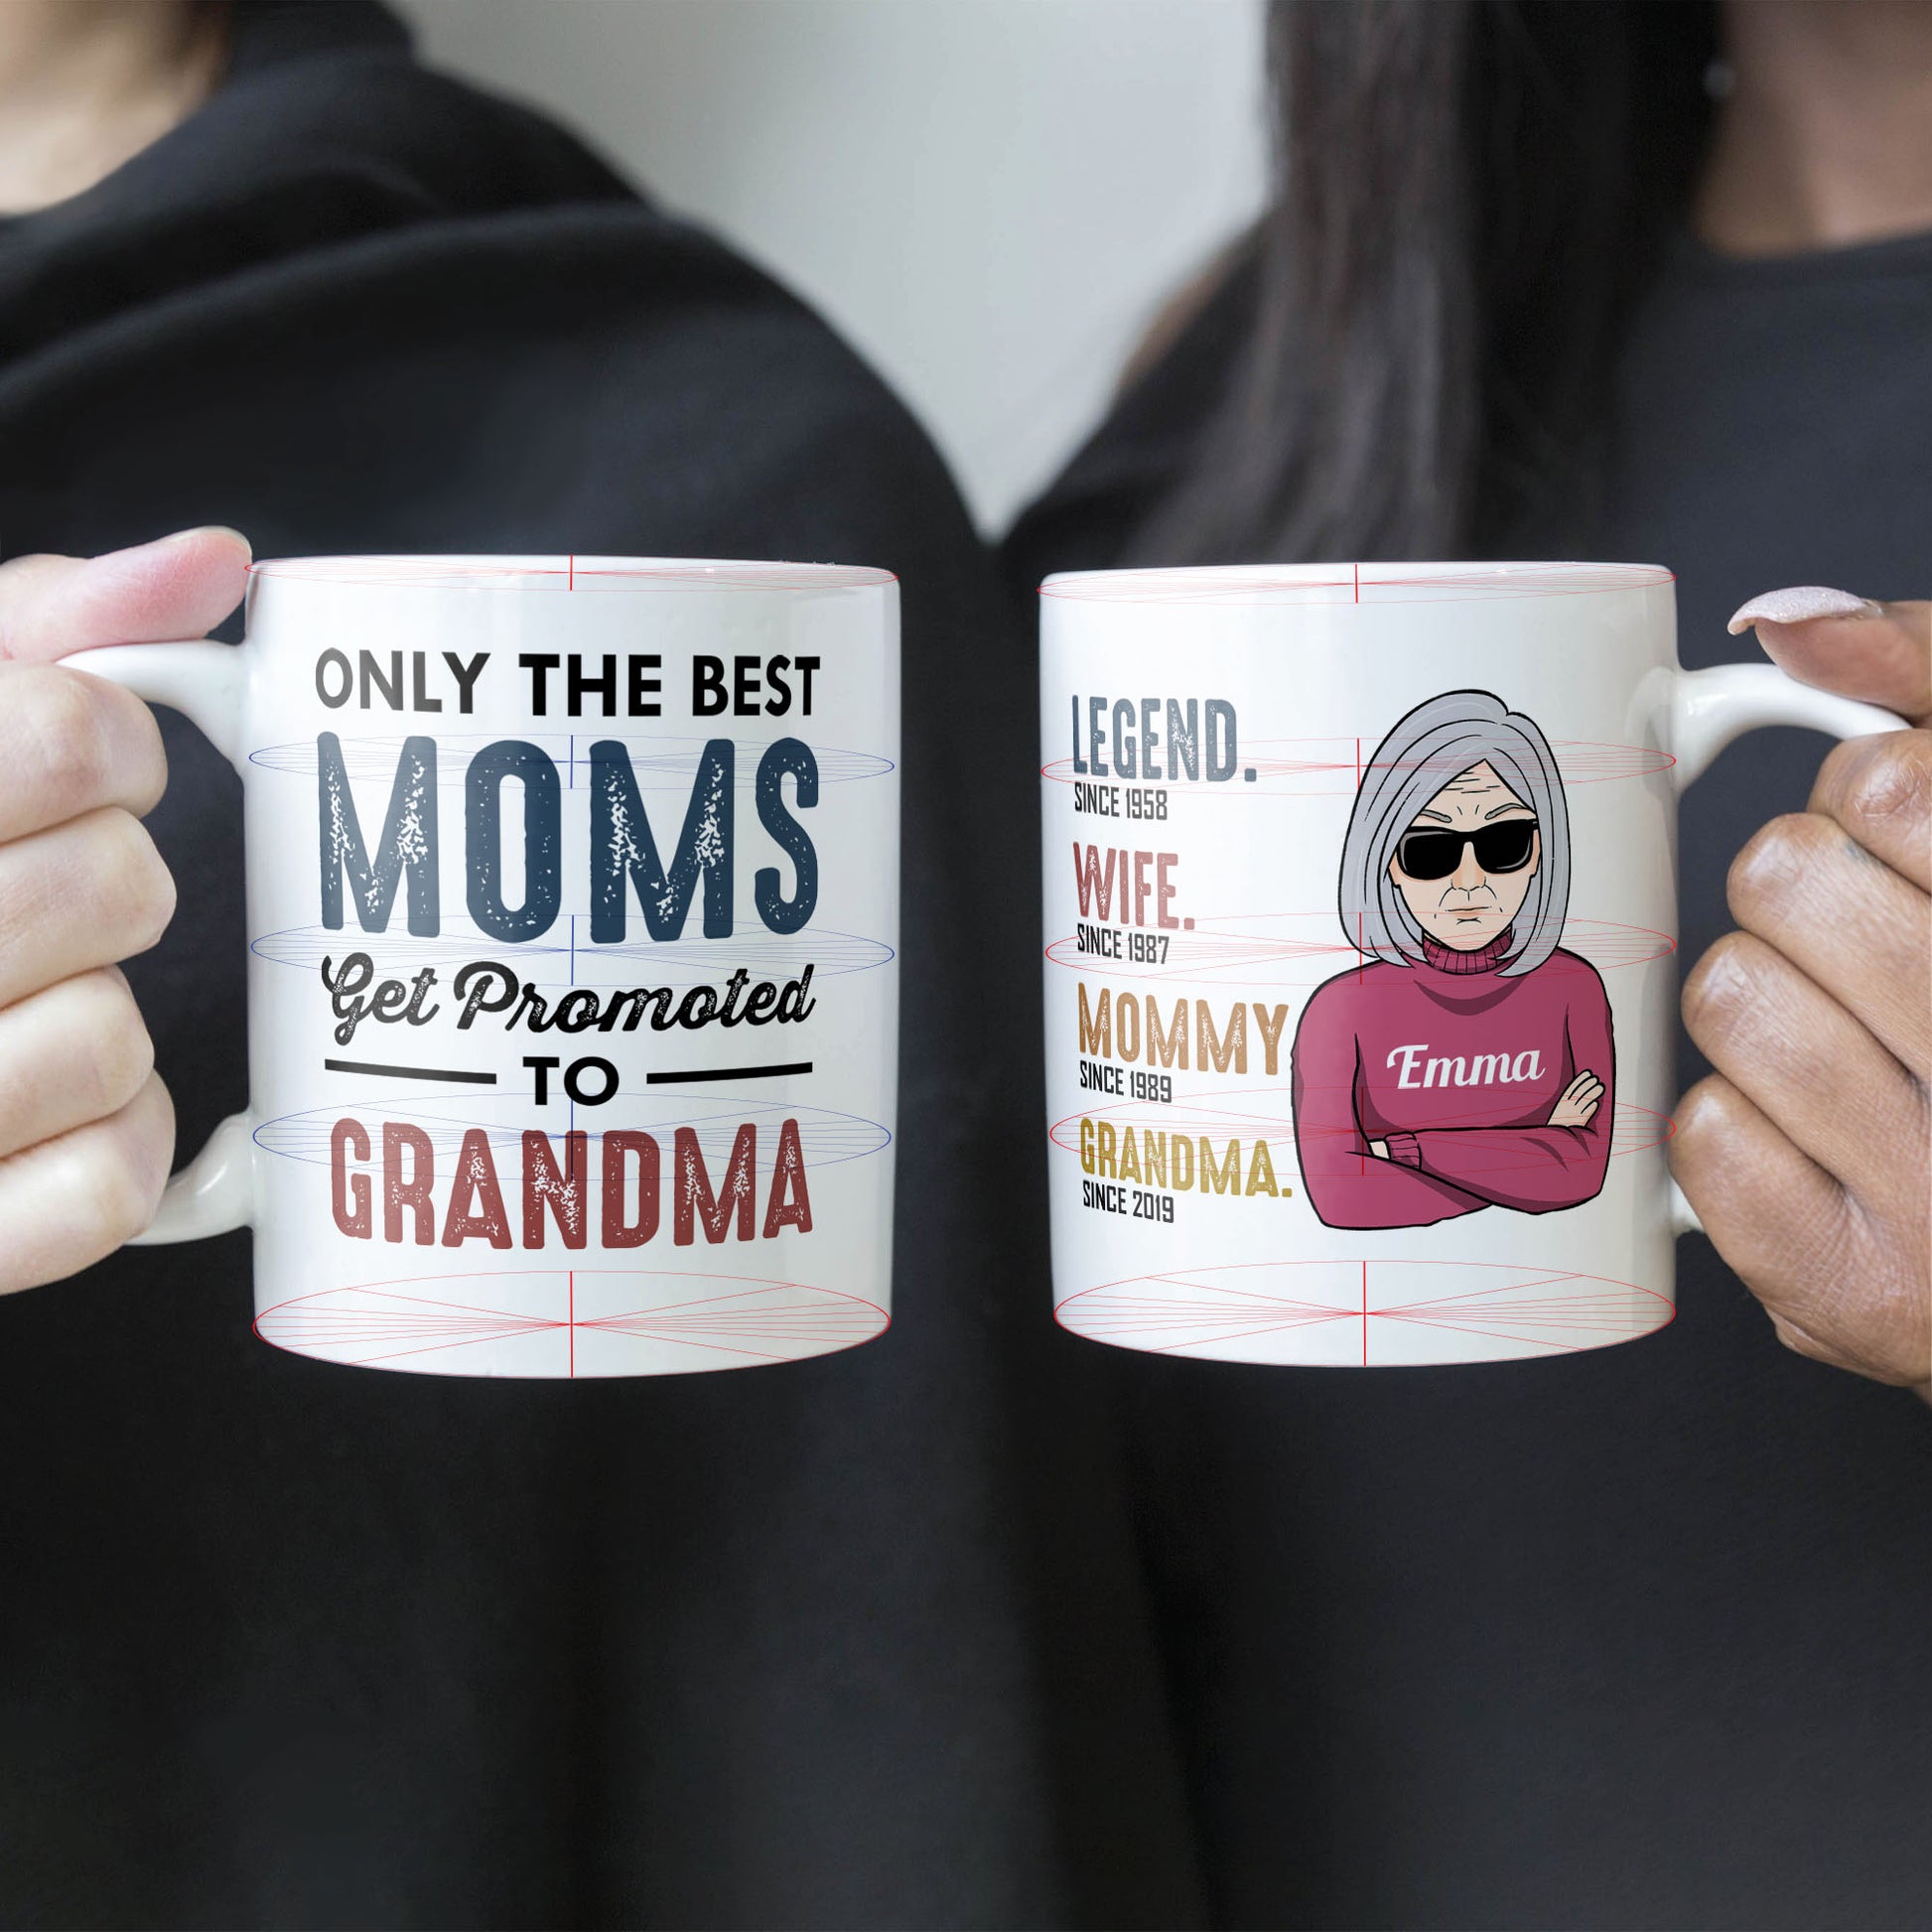 Personalized Grandma gifts, Personalized Gift for Grandma gift  personalized, Grandparents Gifts, this grandma belong to, Promoted to  Grandma